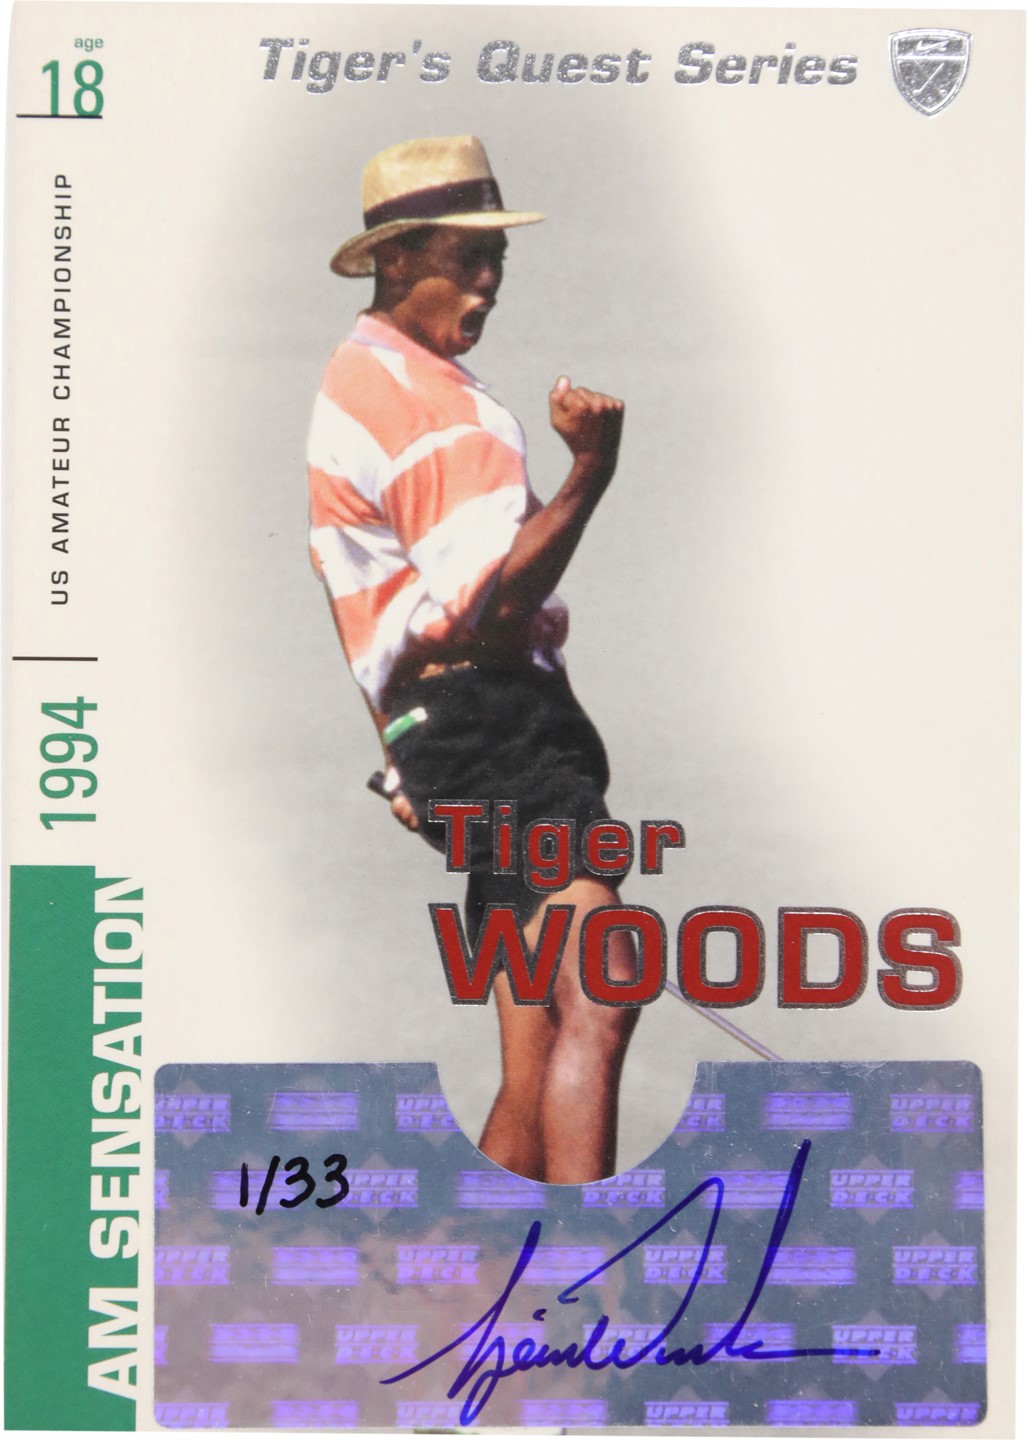 Olympics and All Sports - 2002 Upper Deck "Tigers Quest" Series Sensation Tiger Woods Autograph #1/33 and Bobblehead